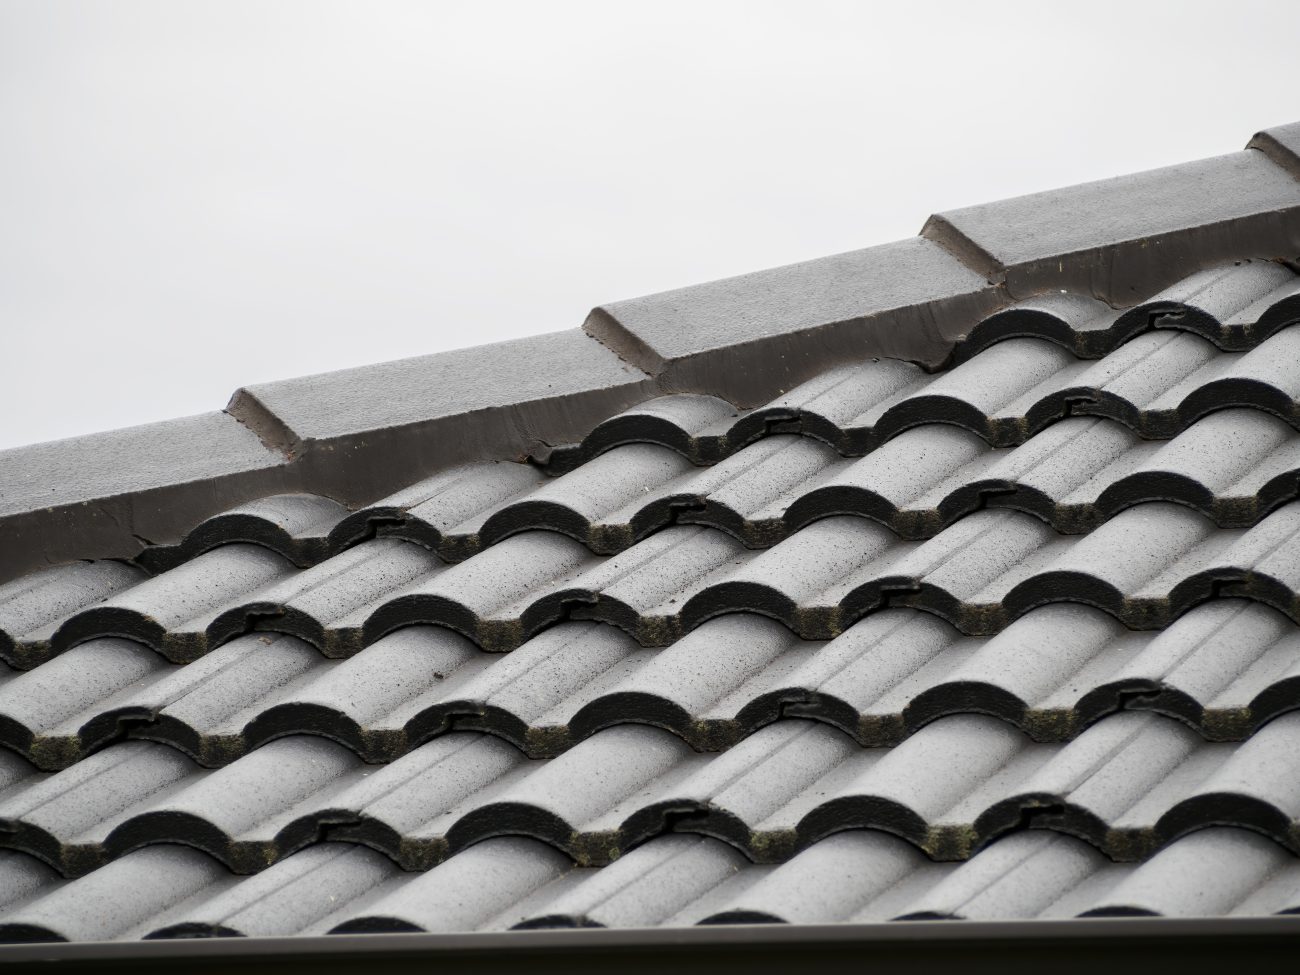 Close-up of corrugated concrete tiles on a sloping roof